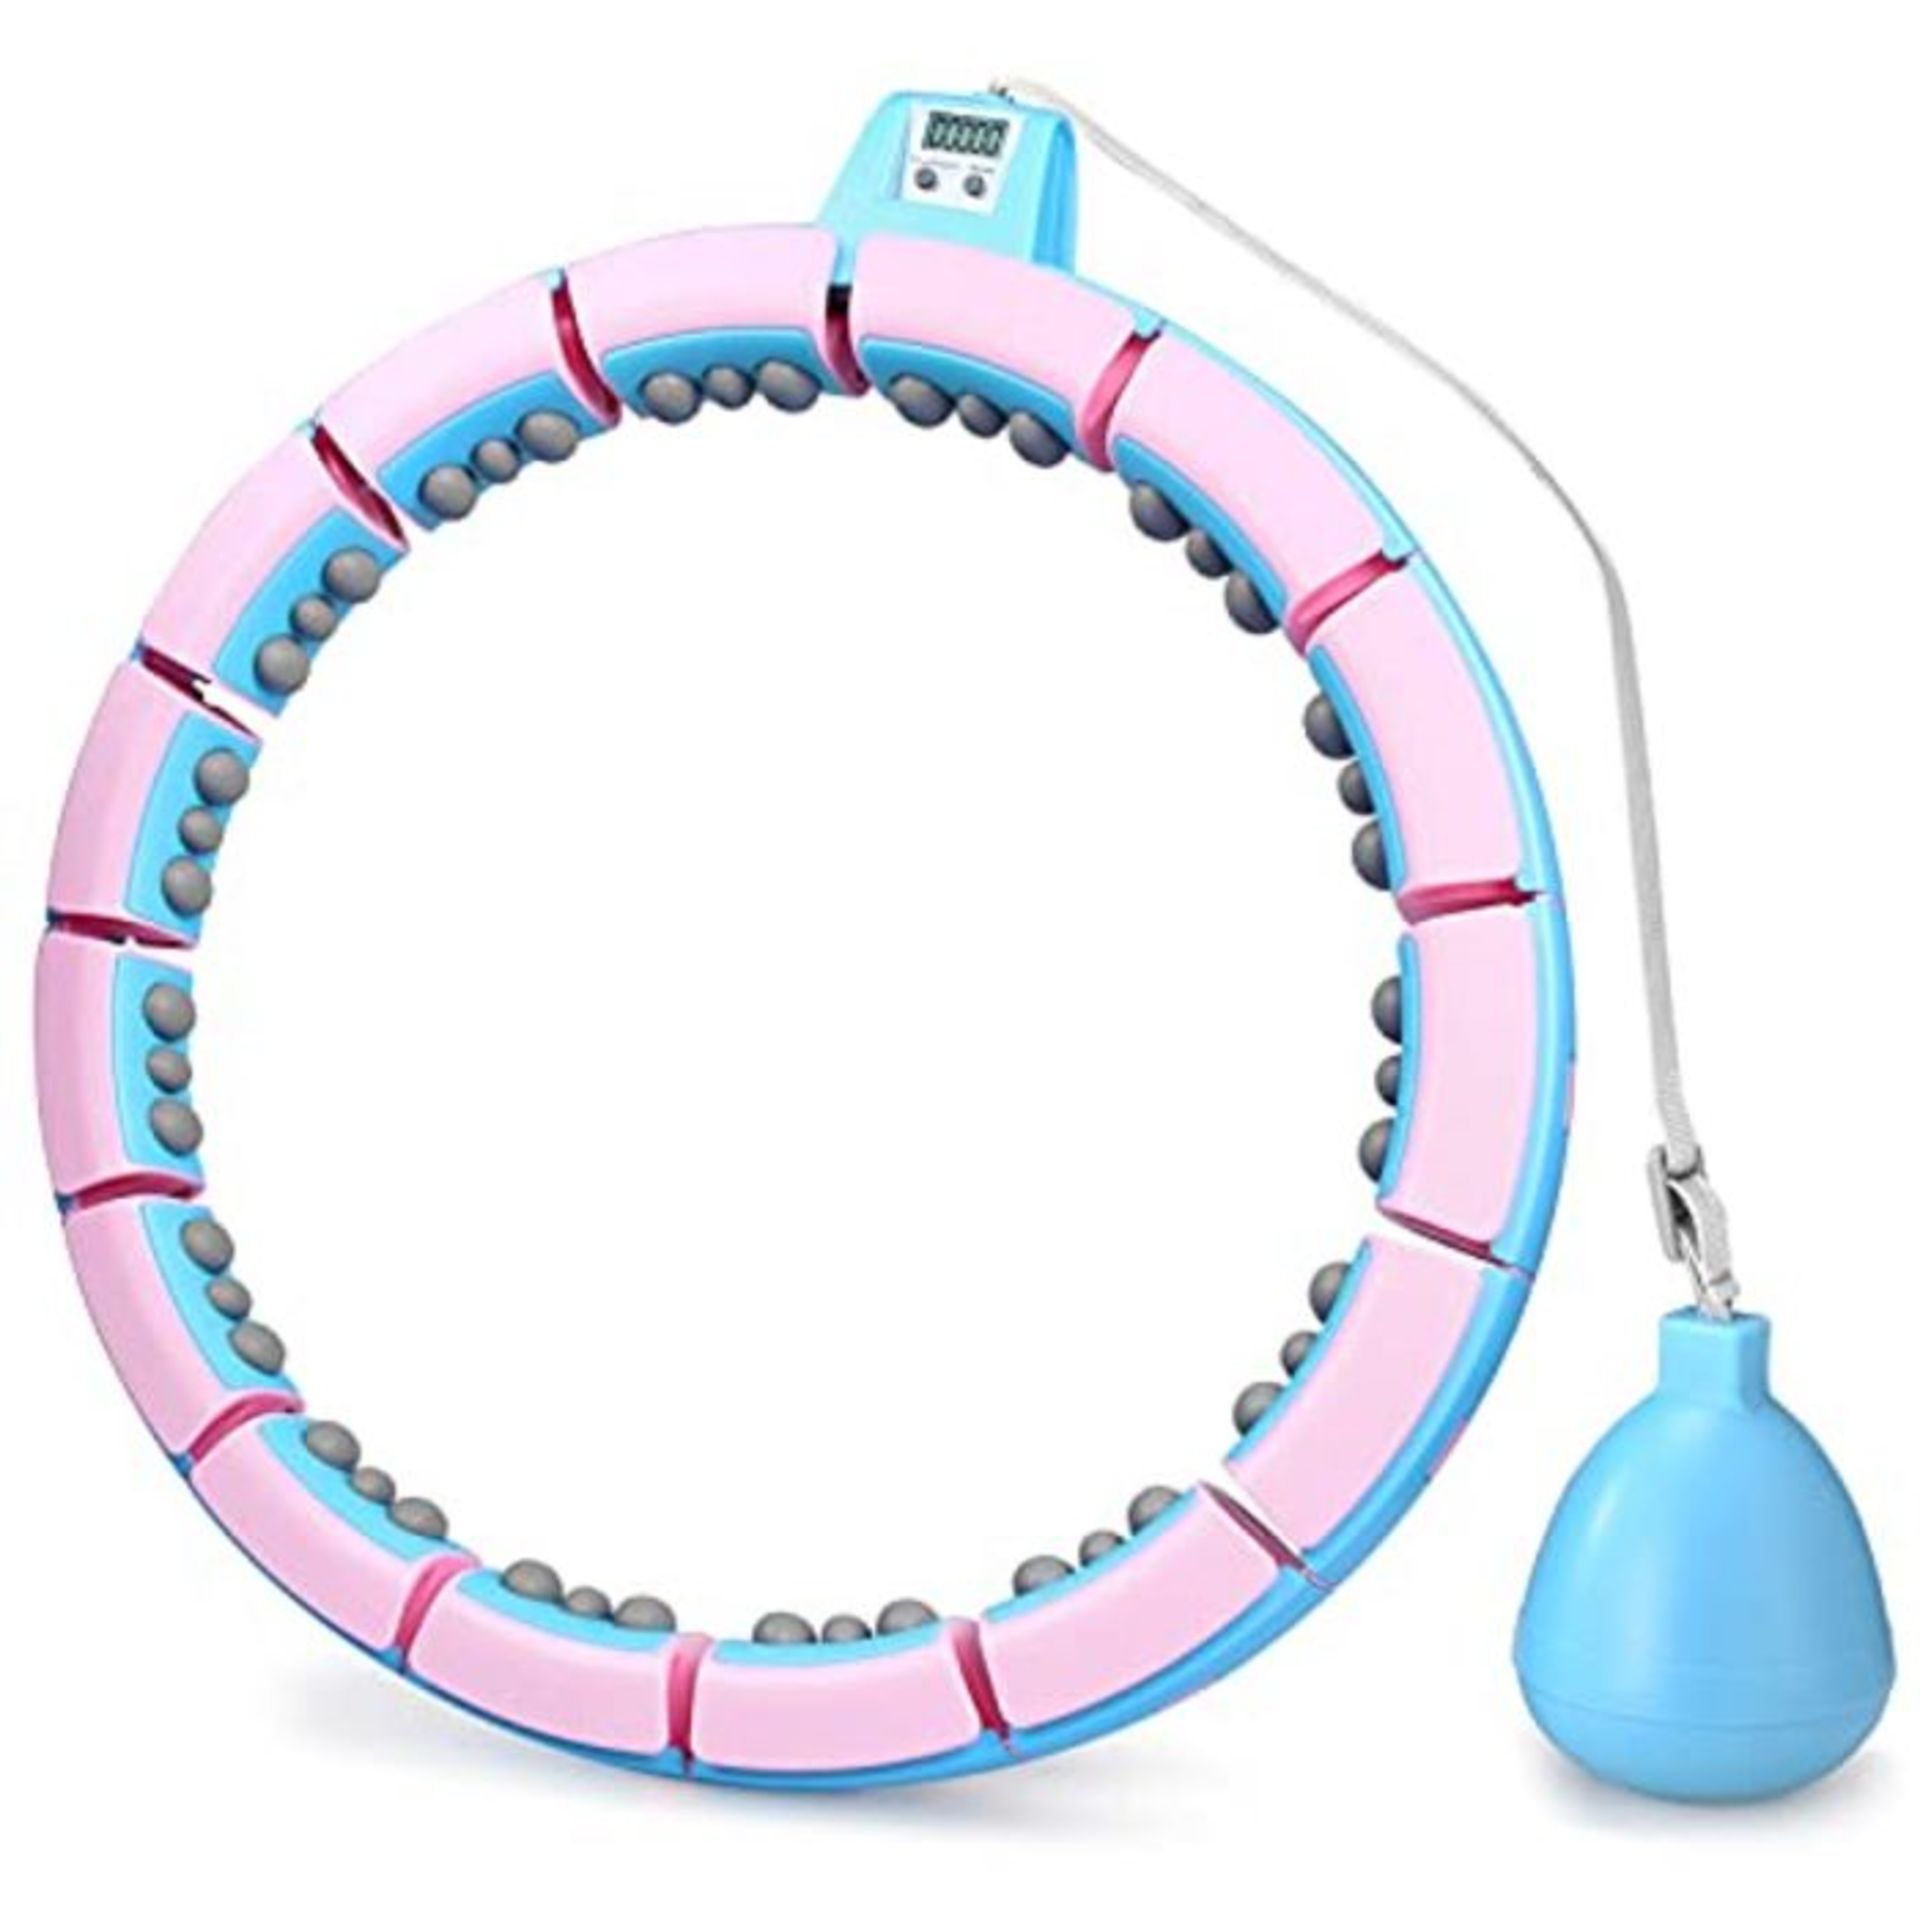 Lineluck Smart Hula Hoop with Counter, Hula Hoop Fitness Hoop Not Falling with Massage